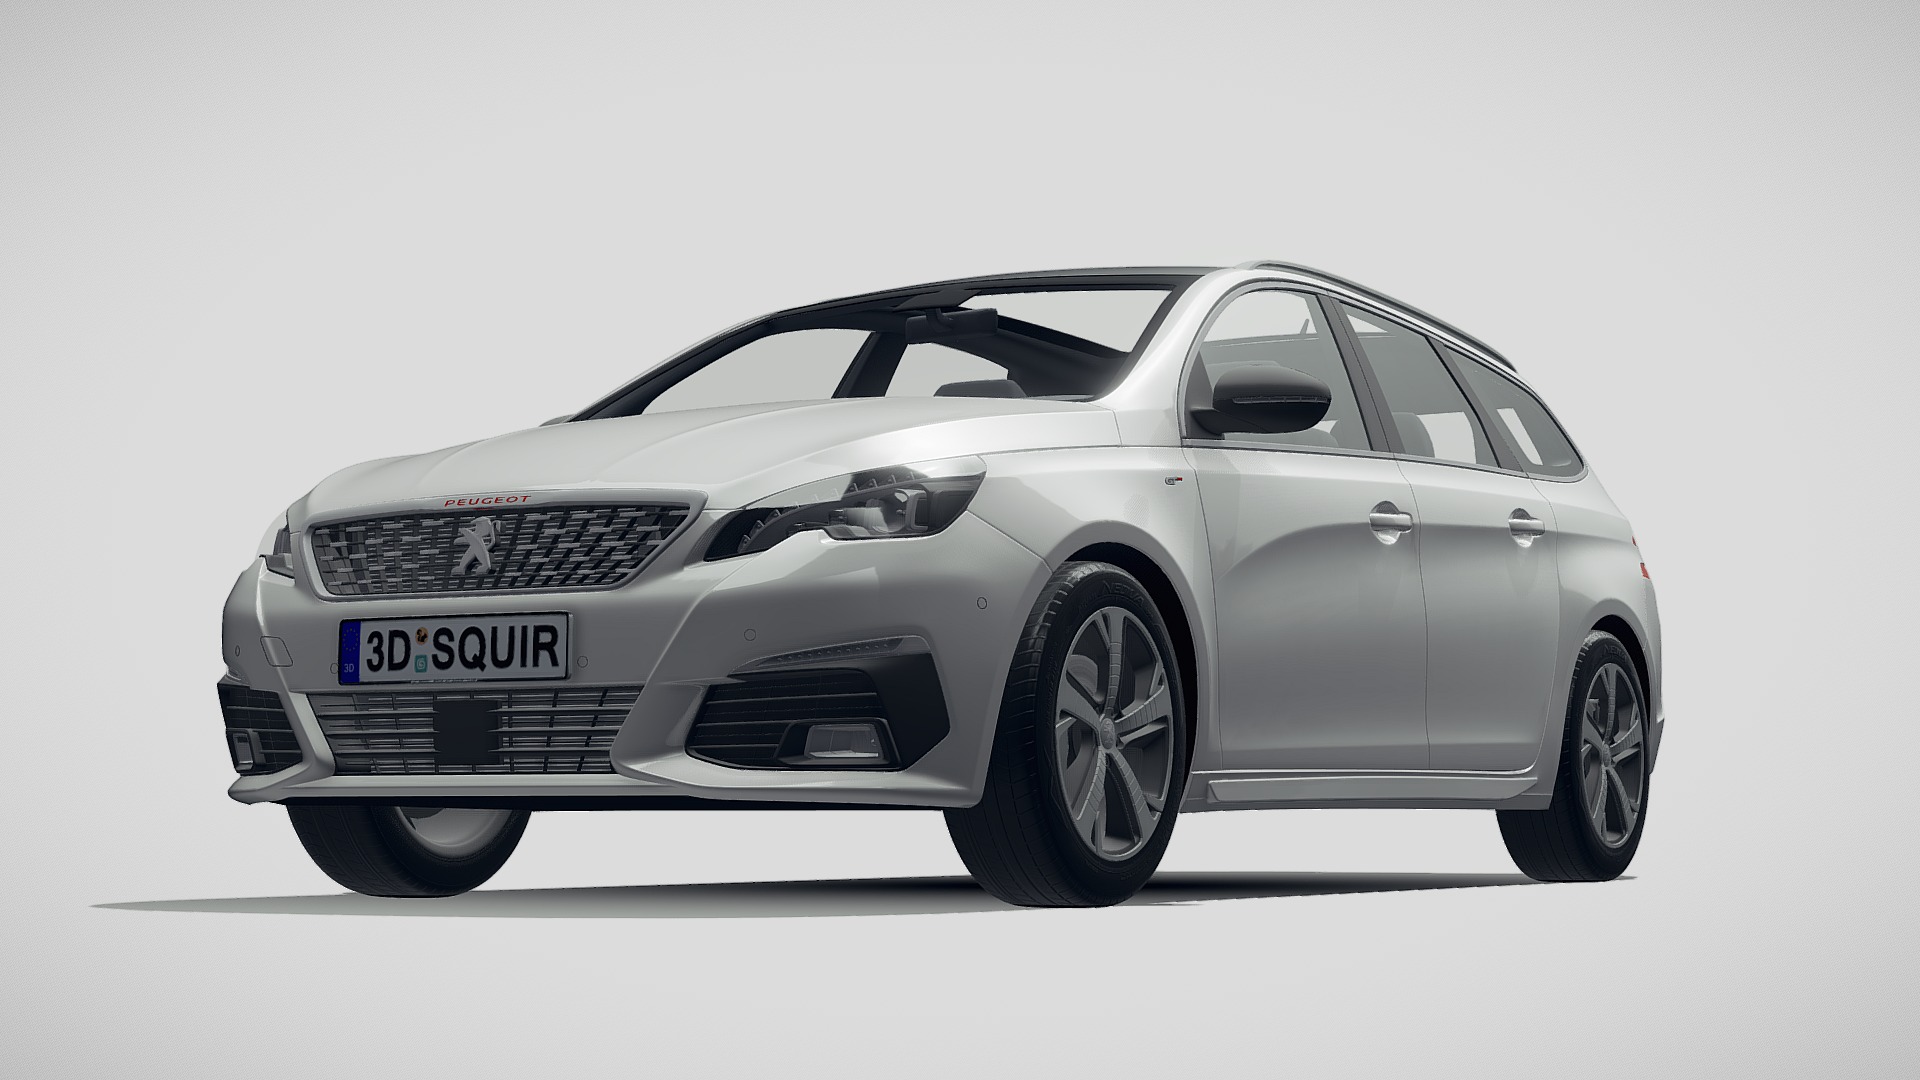 3D model Peugeot 308 SW 2019 - This is a 3D model of the Peugeot 308 SW 2019. The 3D model is about a silver car with a black background.